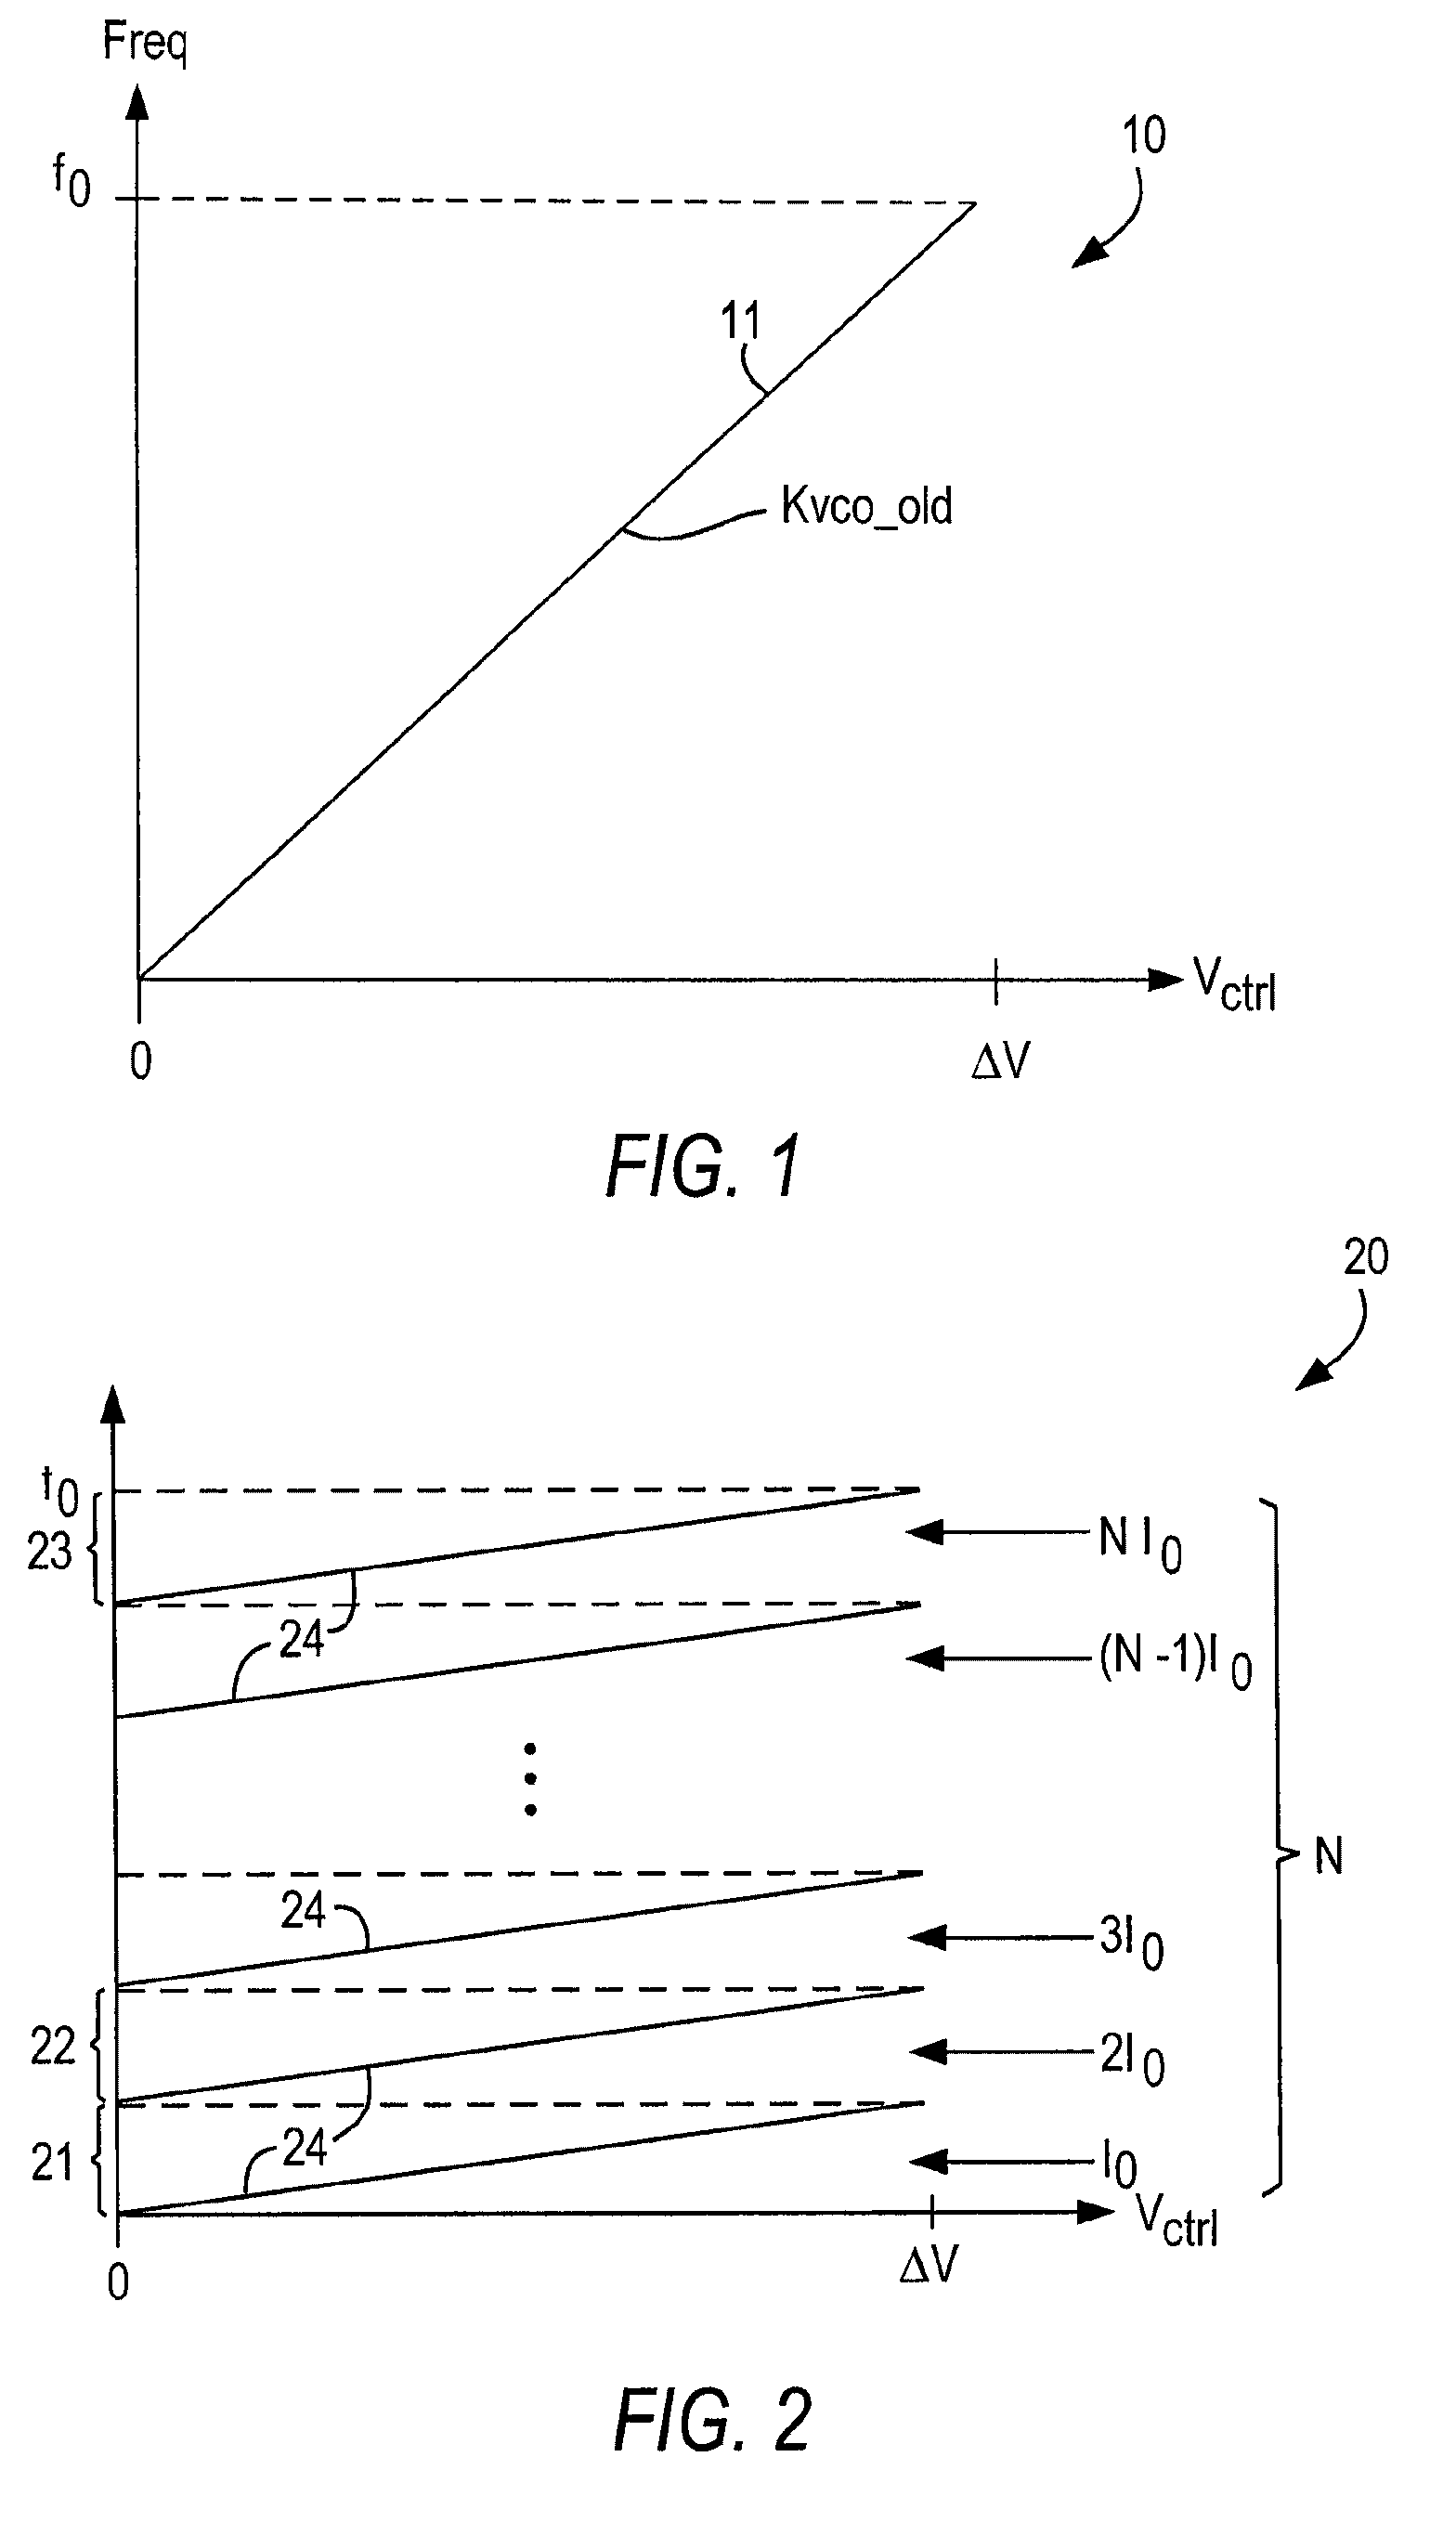 High-frequency low-gain ring VCO for clock-data recovery in high-speed serial interface of a programmable logic device